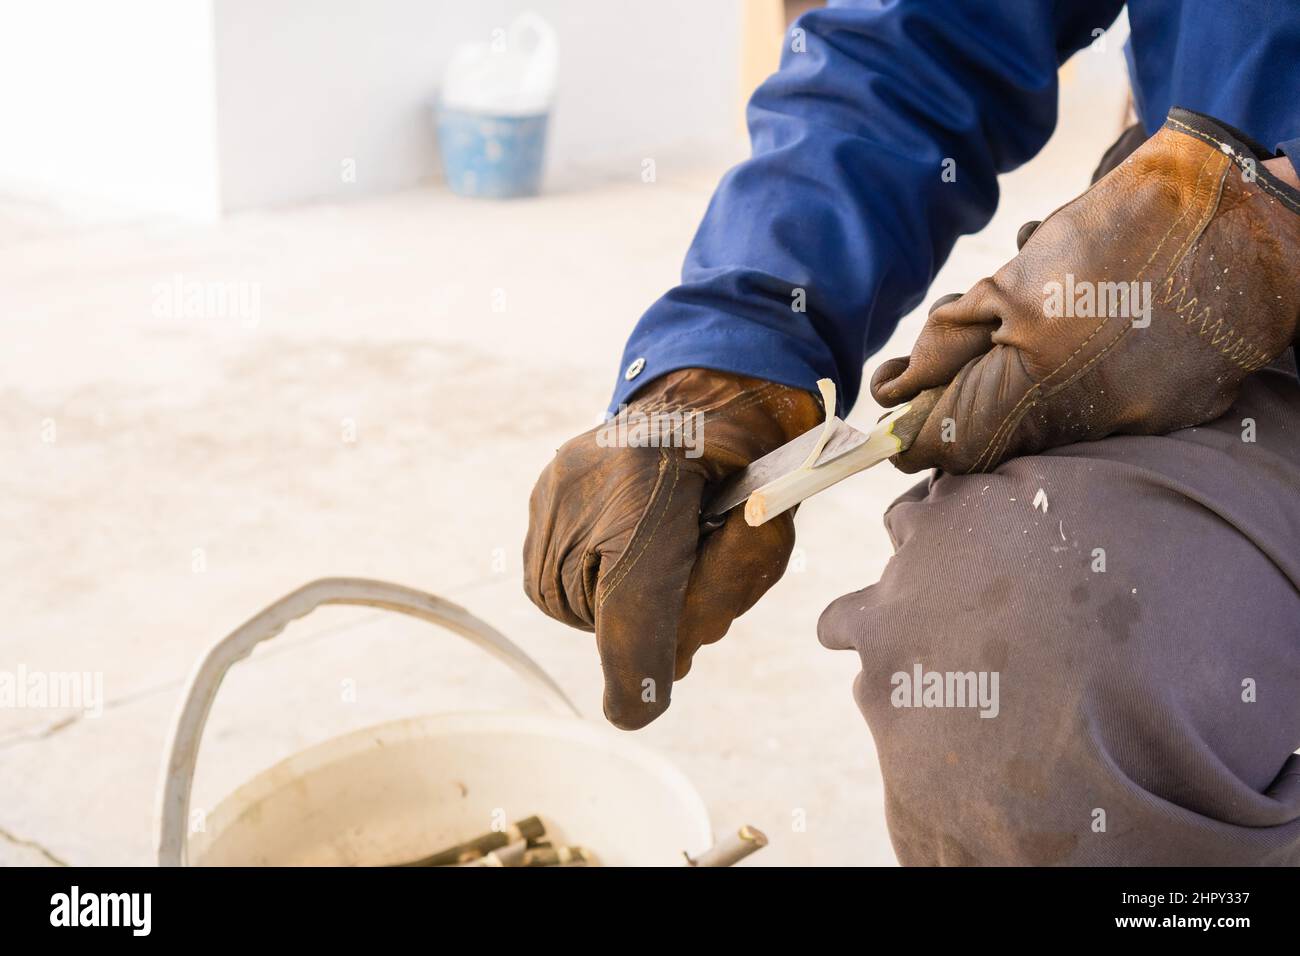 Person making a wood tree stake using a knife and protective gloves. Man sharpening a stick with a penknife, copy space left. Stock Photo